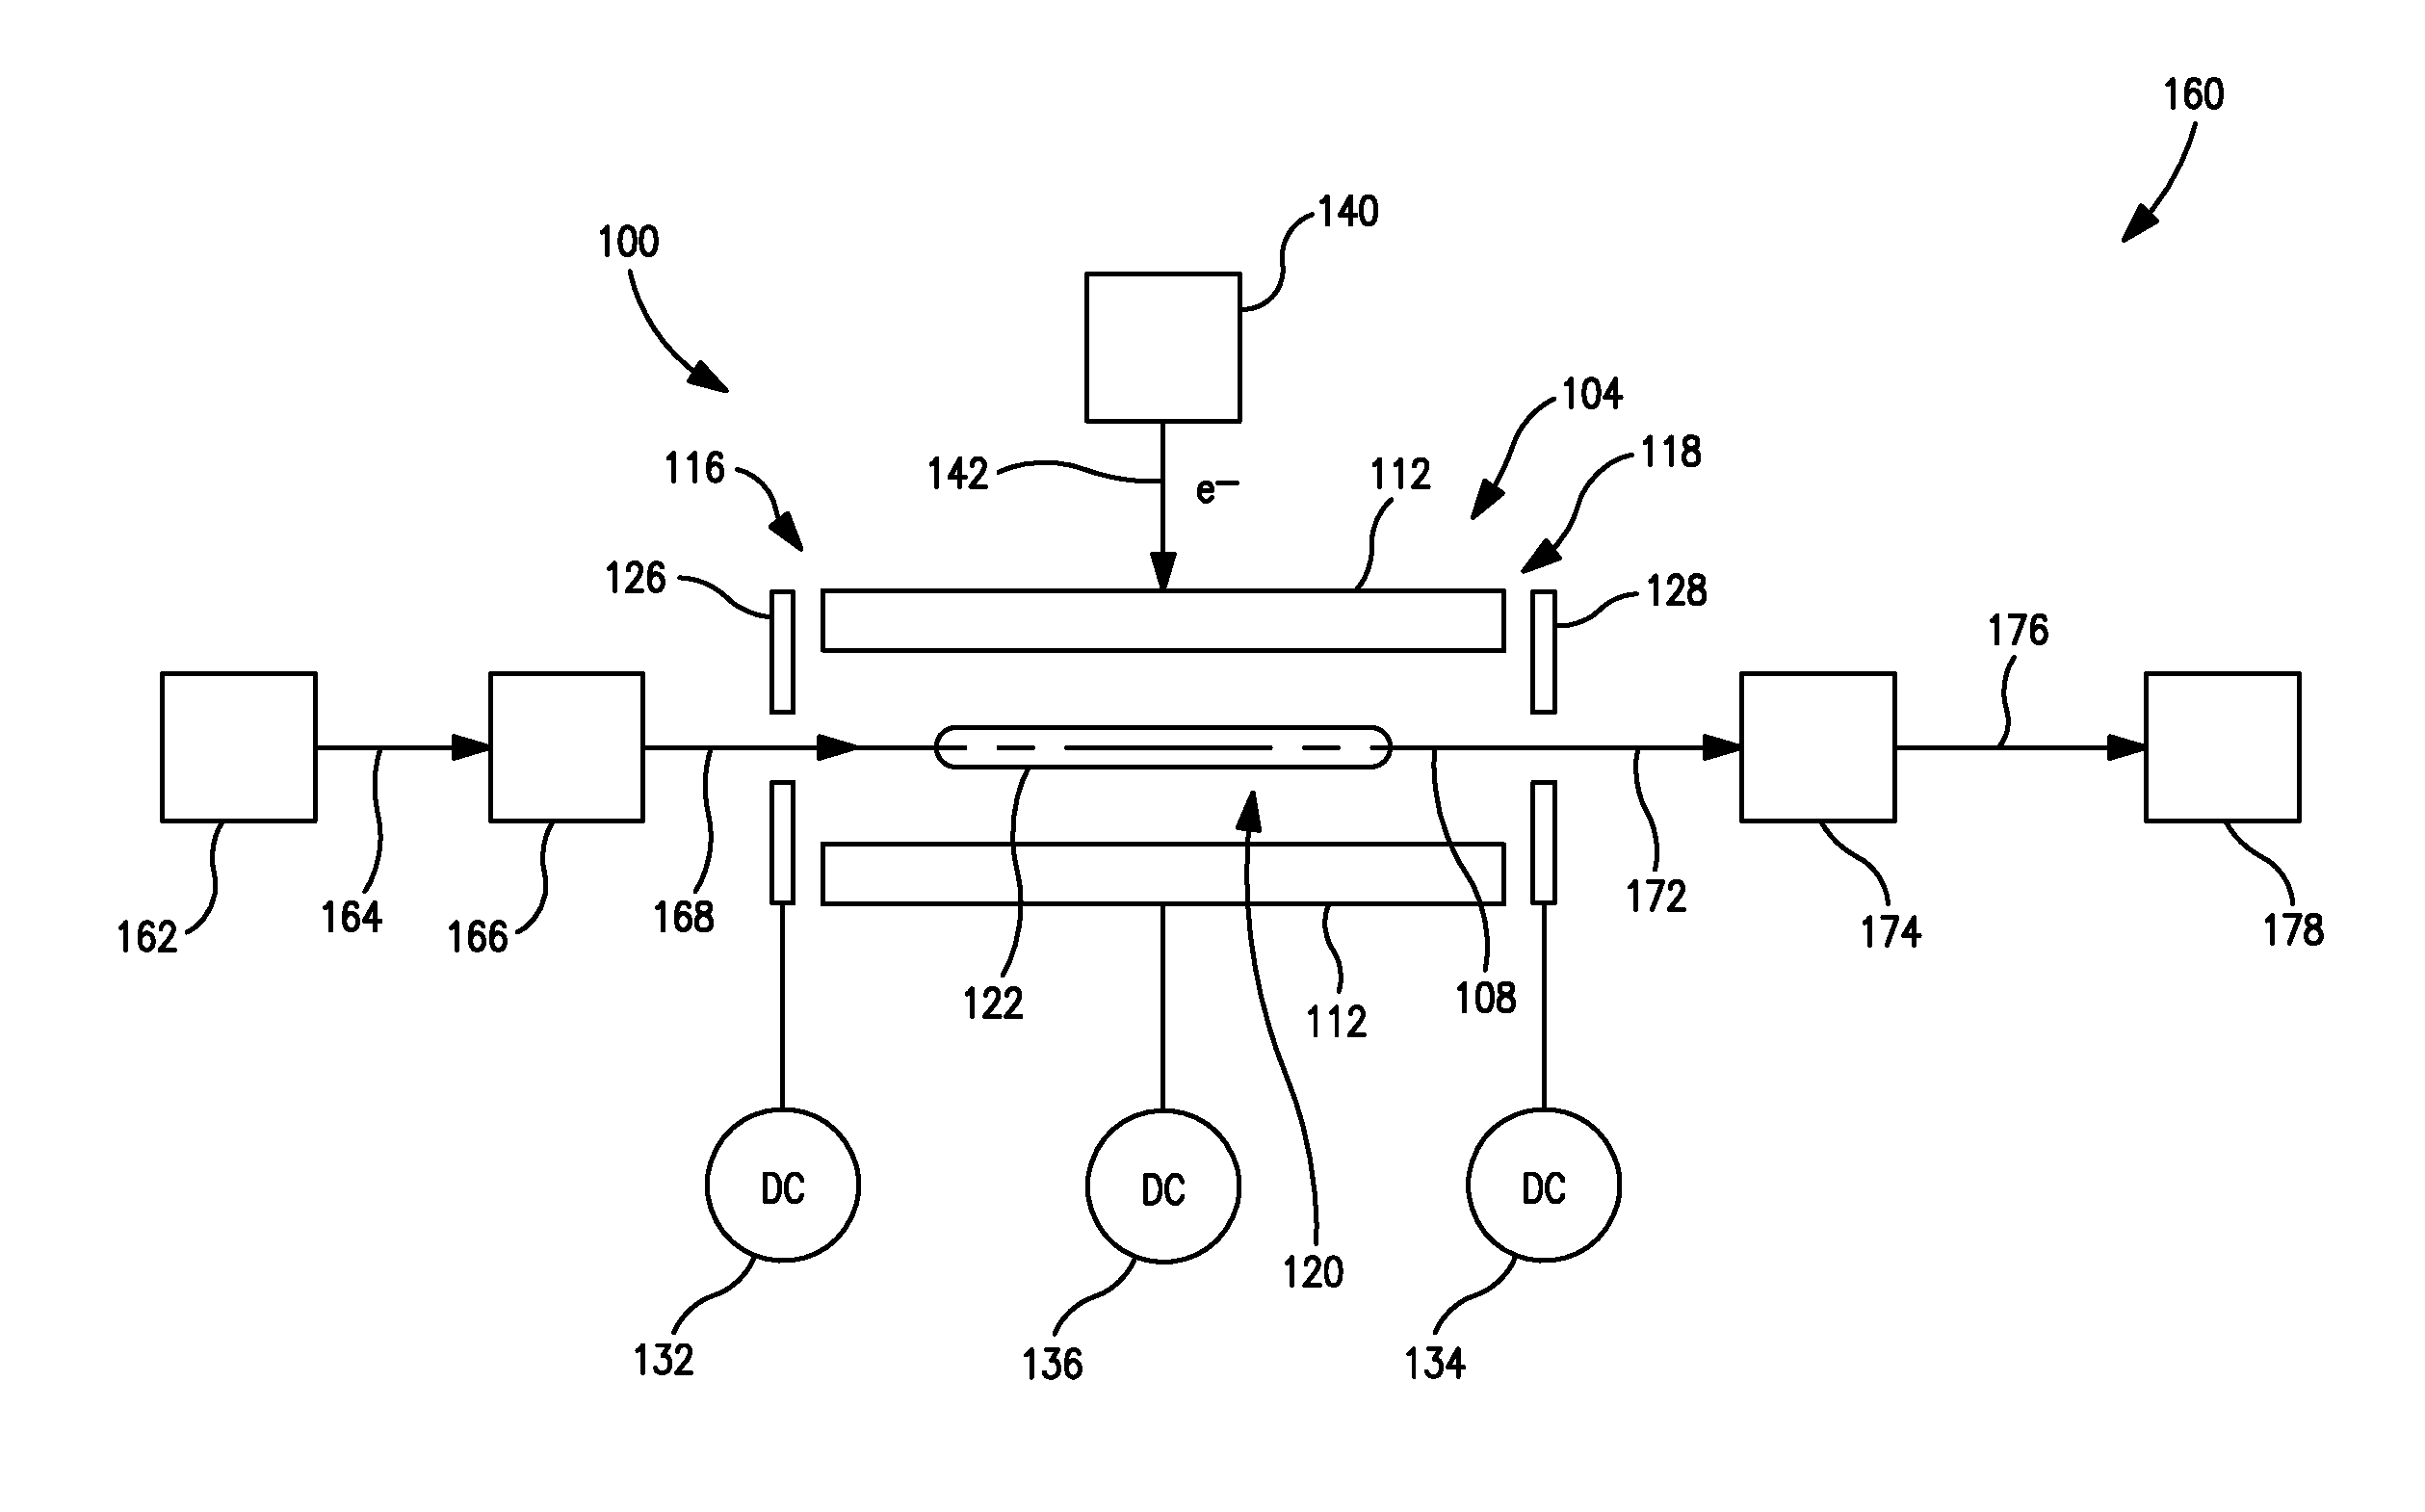 Electron capture dissociation apparatus and related methods